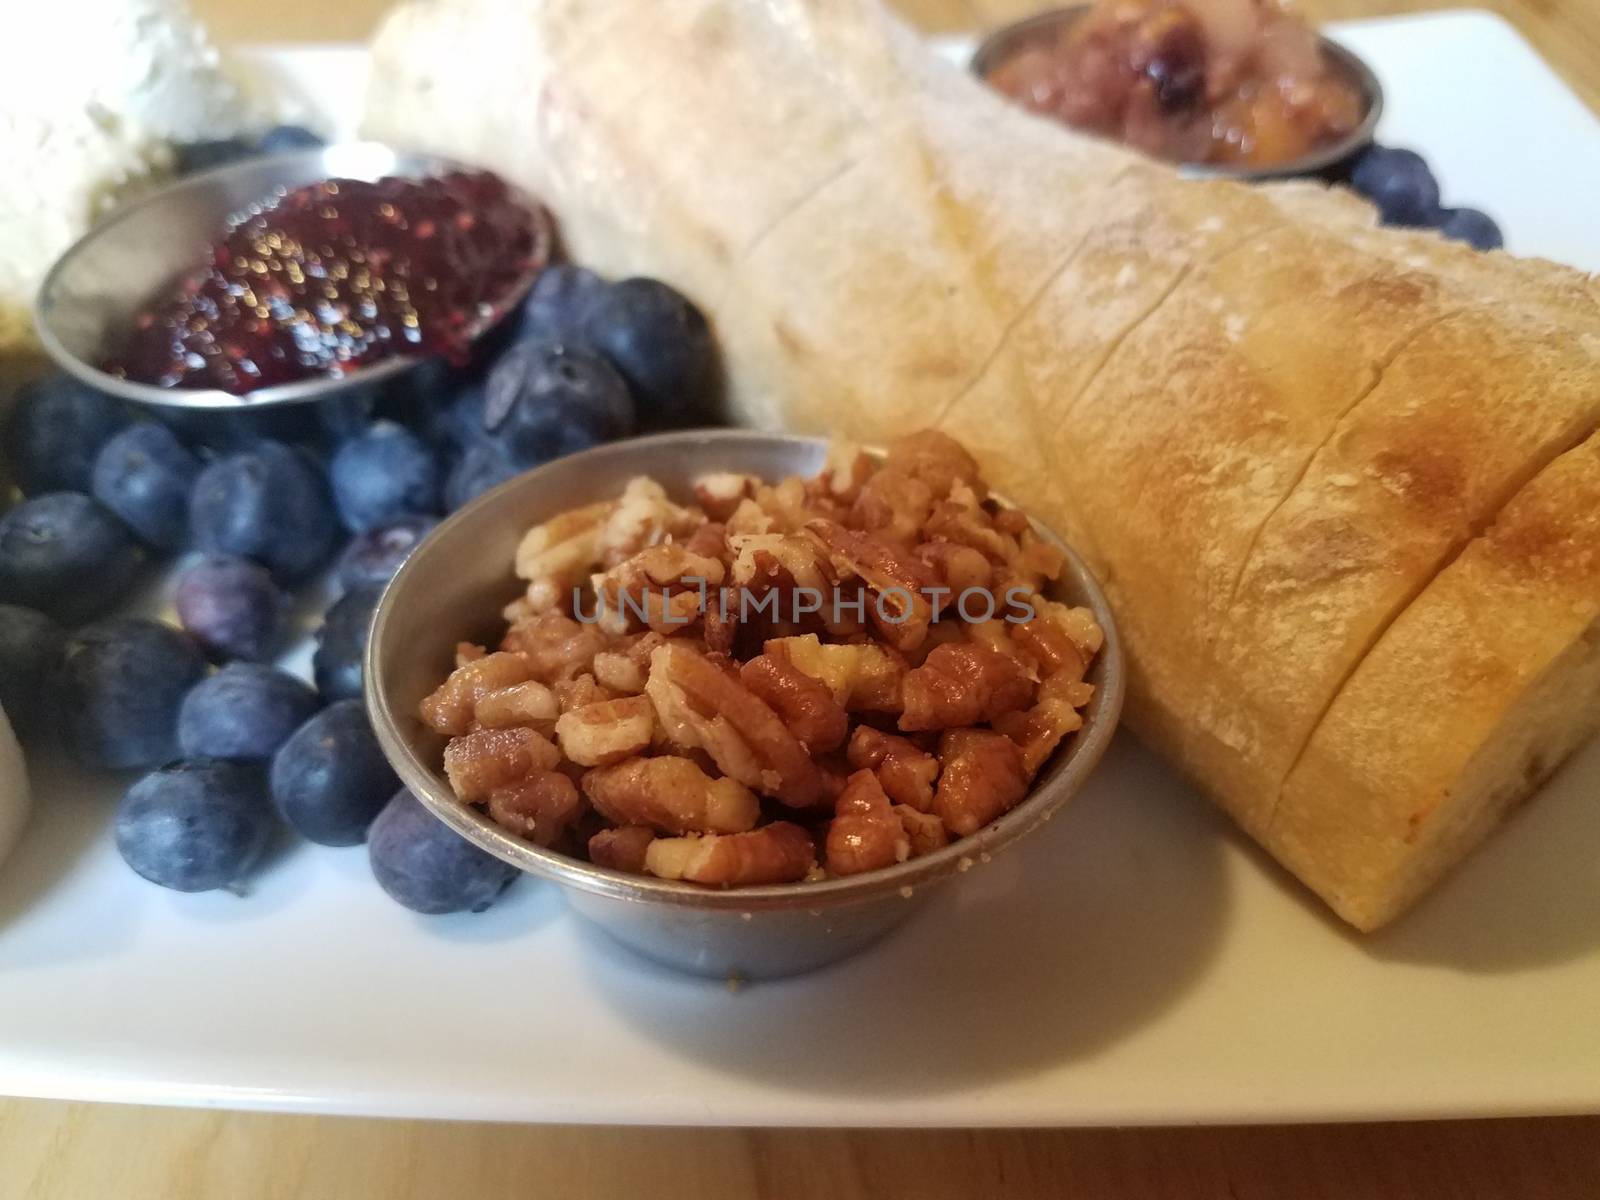 pecans and bread and blueberries with jam on white plate